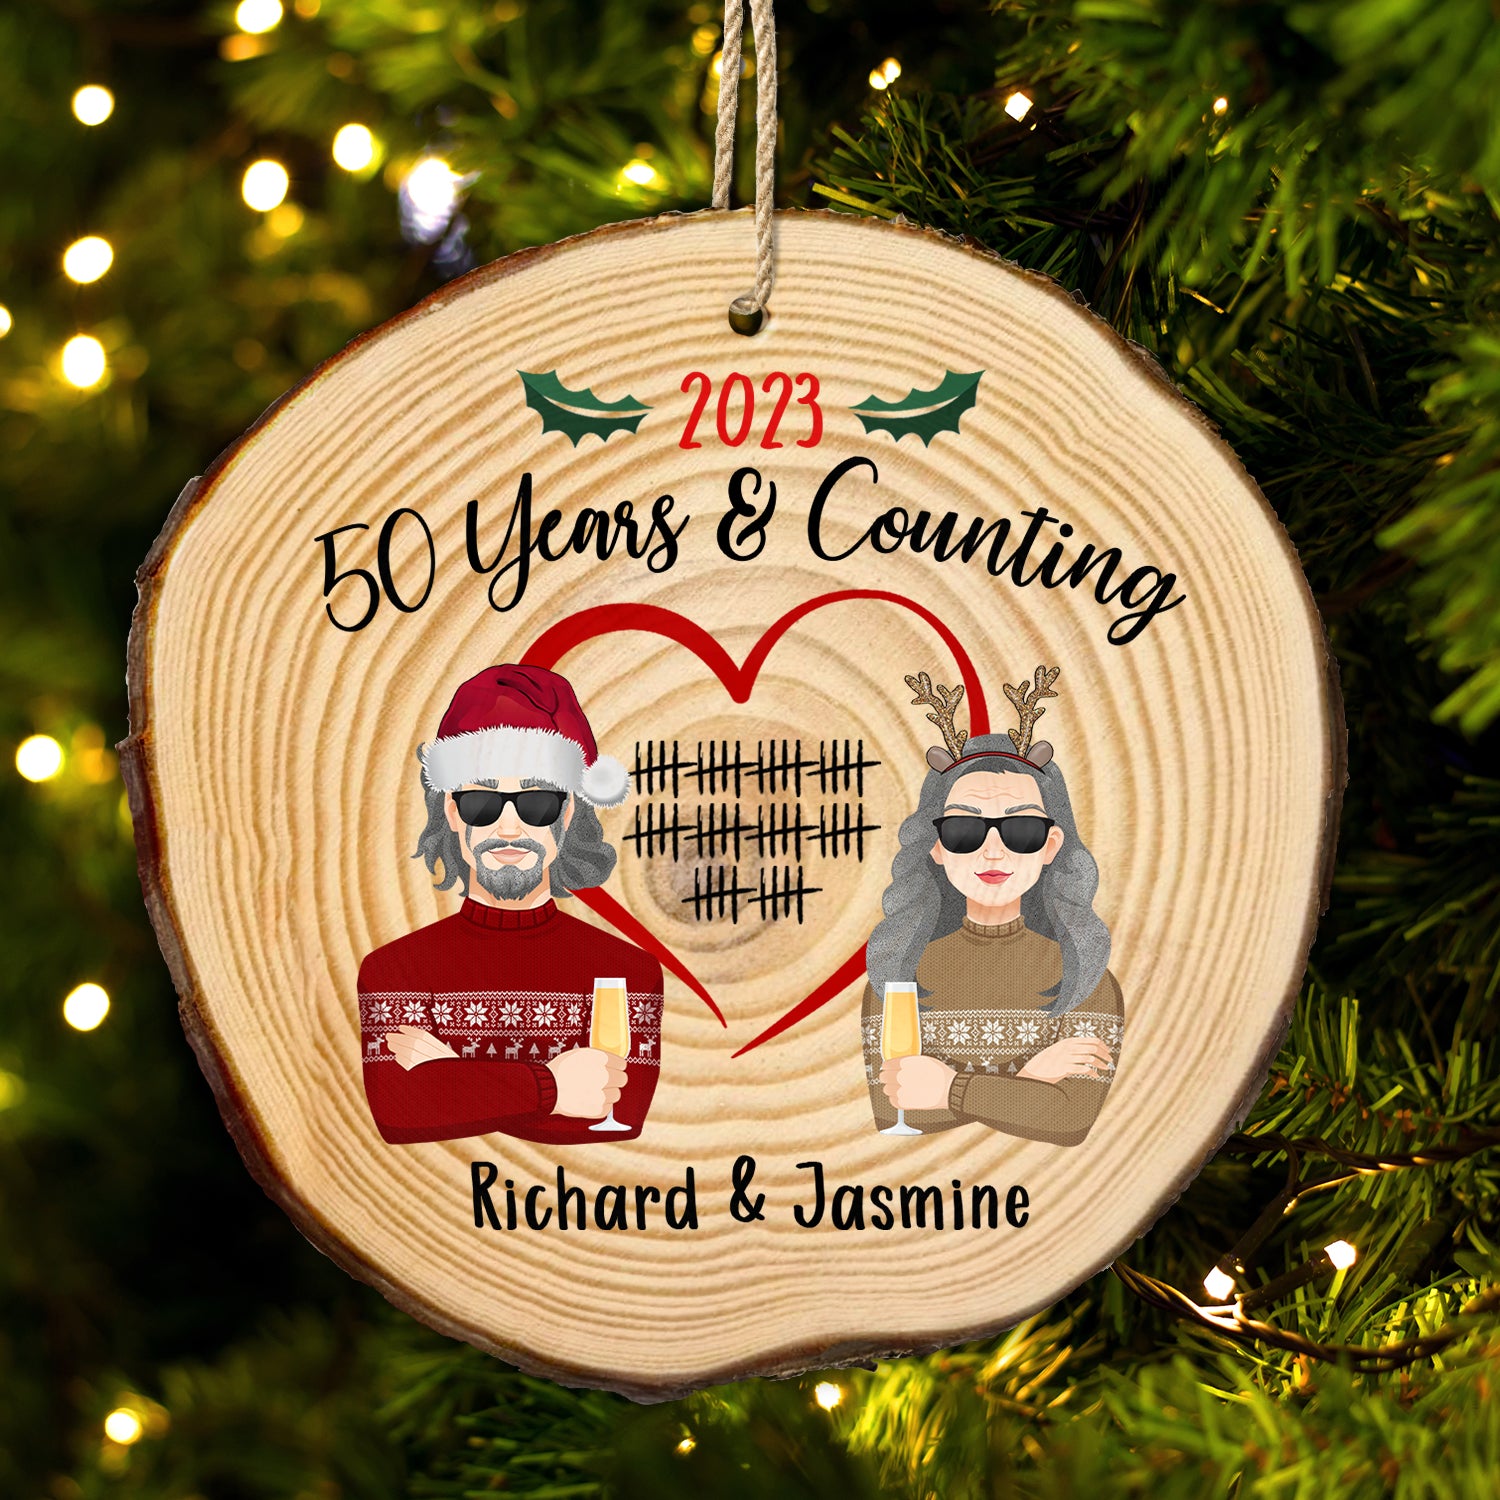 And Counting - Christmas Gift For Elderly Couples - Personalized Wood Slice Ornament